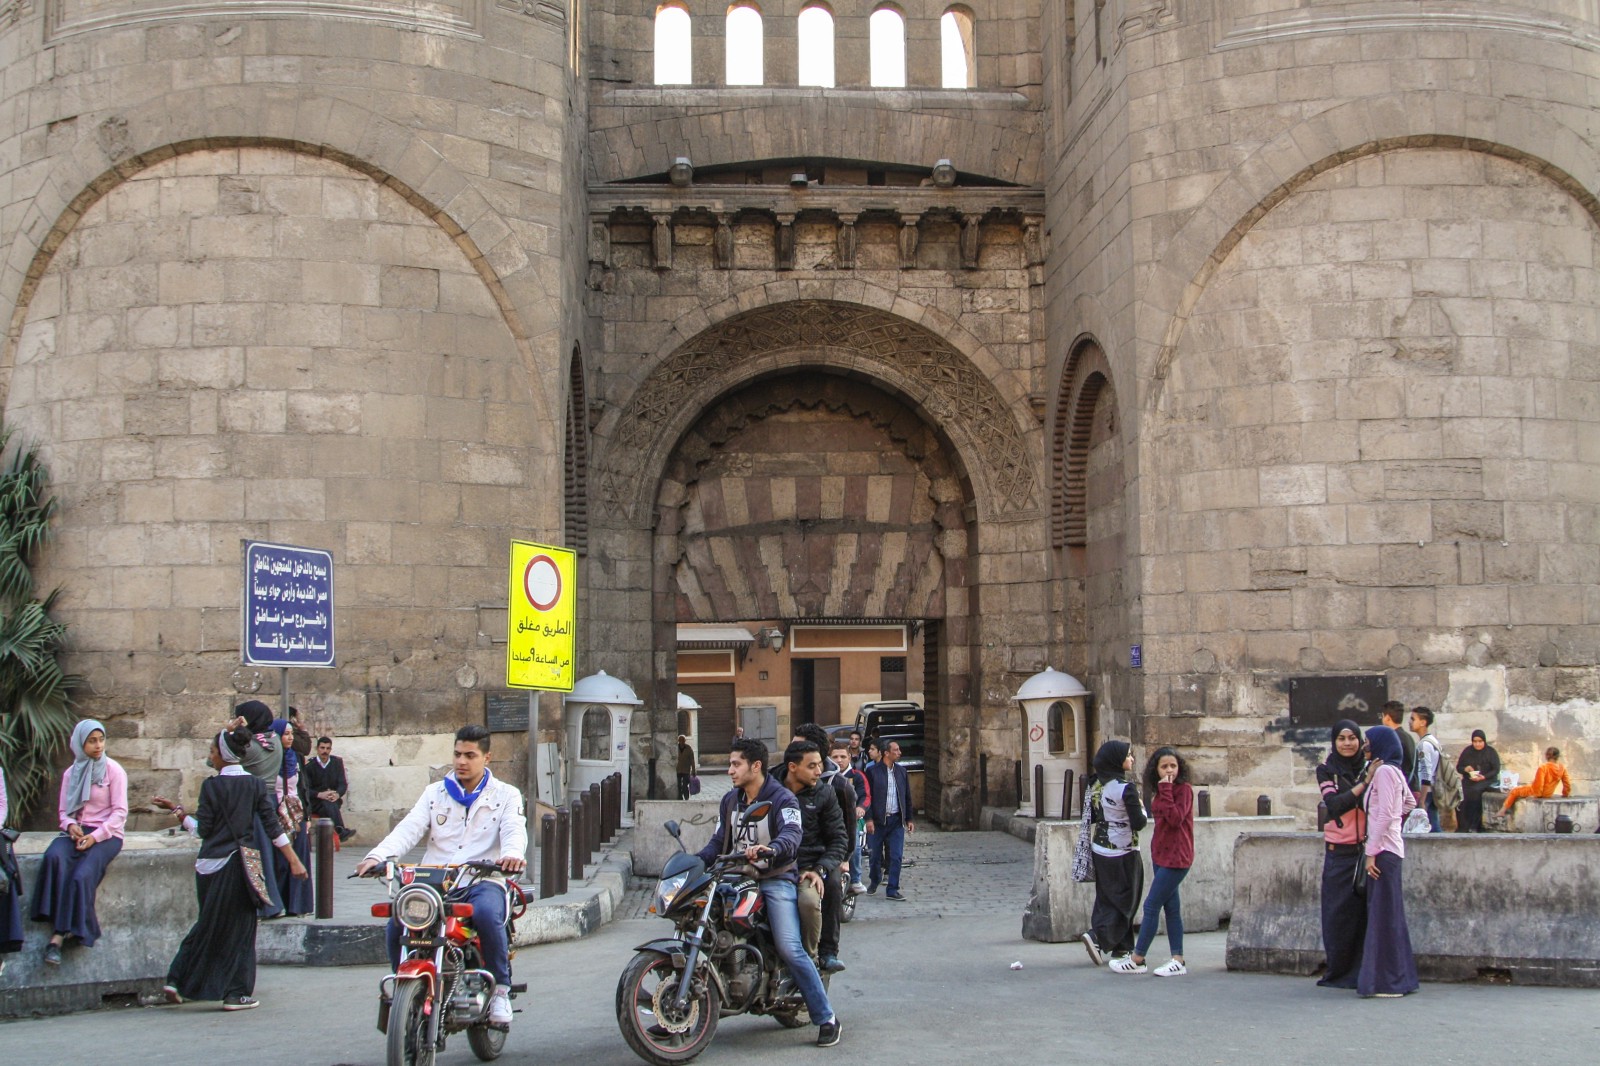 Bab al-Fotouh (Gate of the Conquests), one of the surviving gates on the old city walls. Credit Enas El Masry